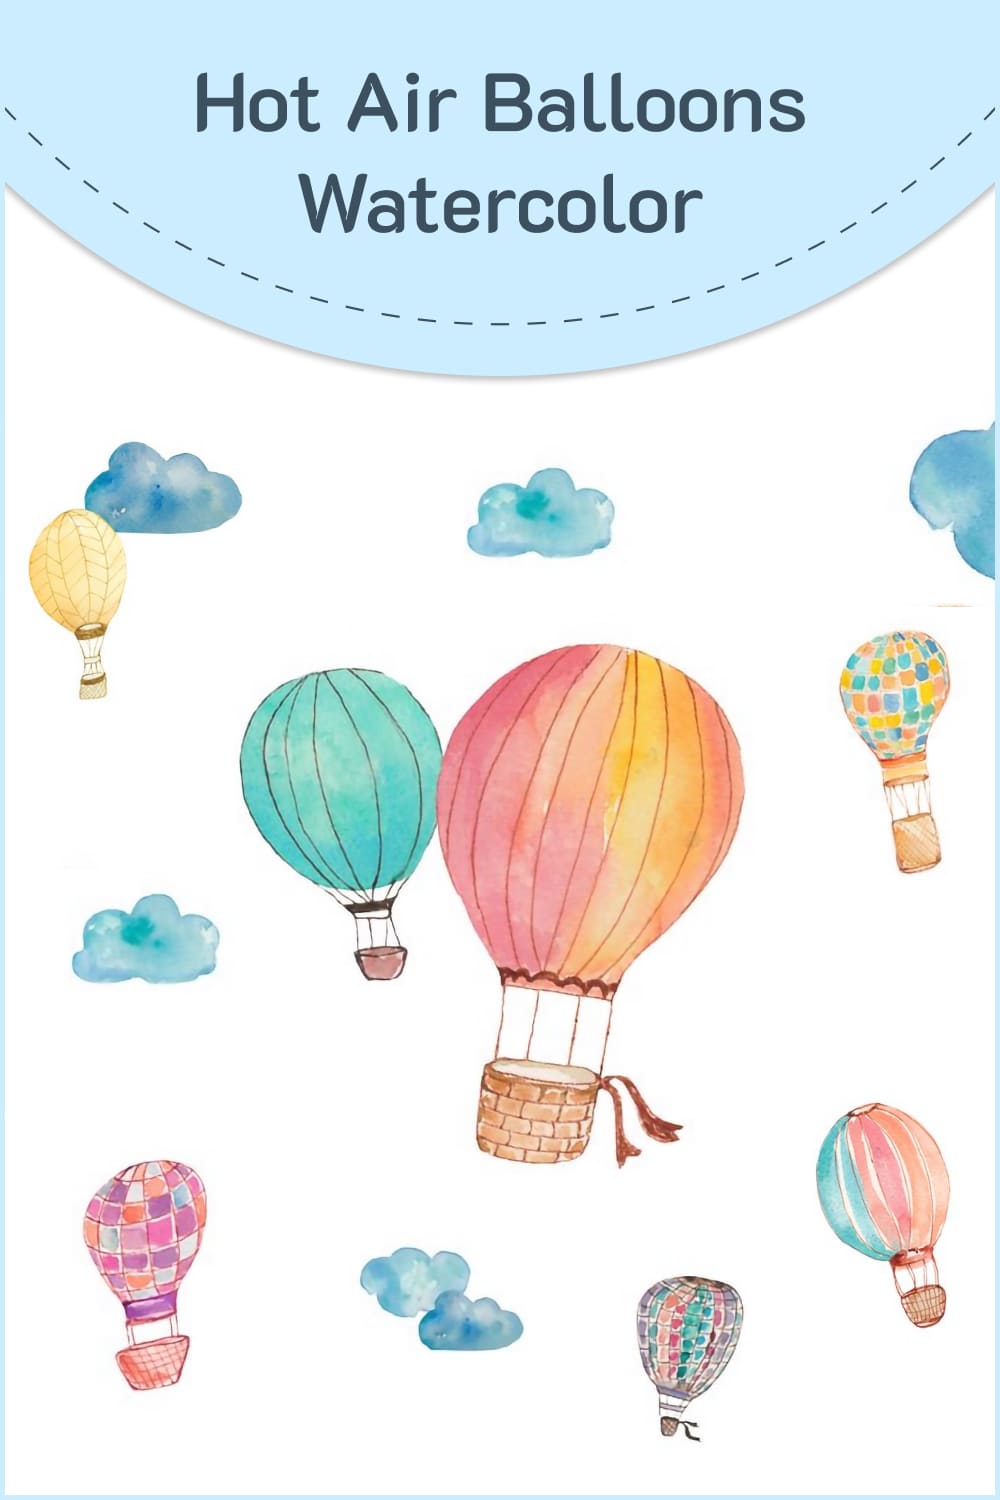 Gorgeous watercolor image with hot air balloons.